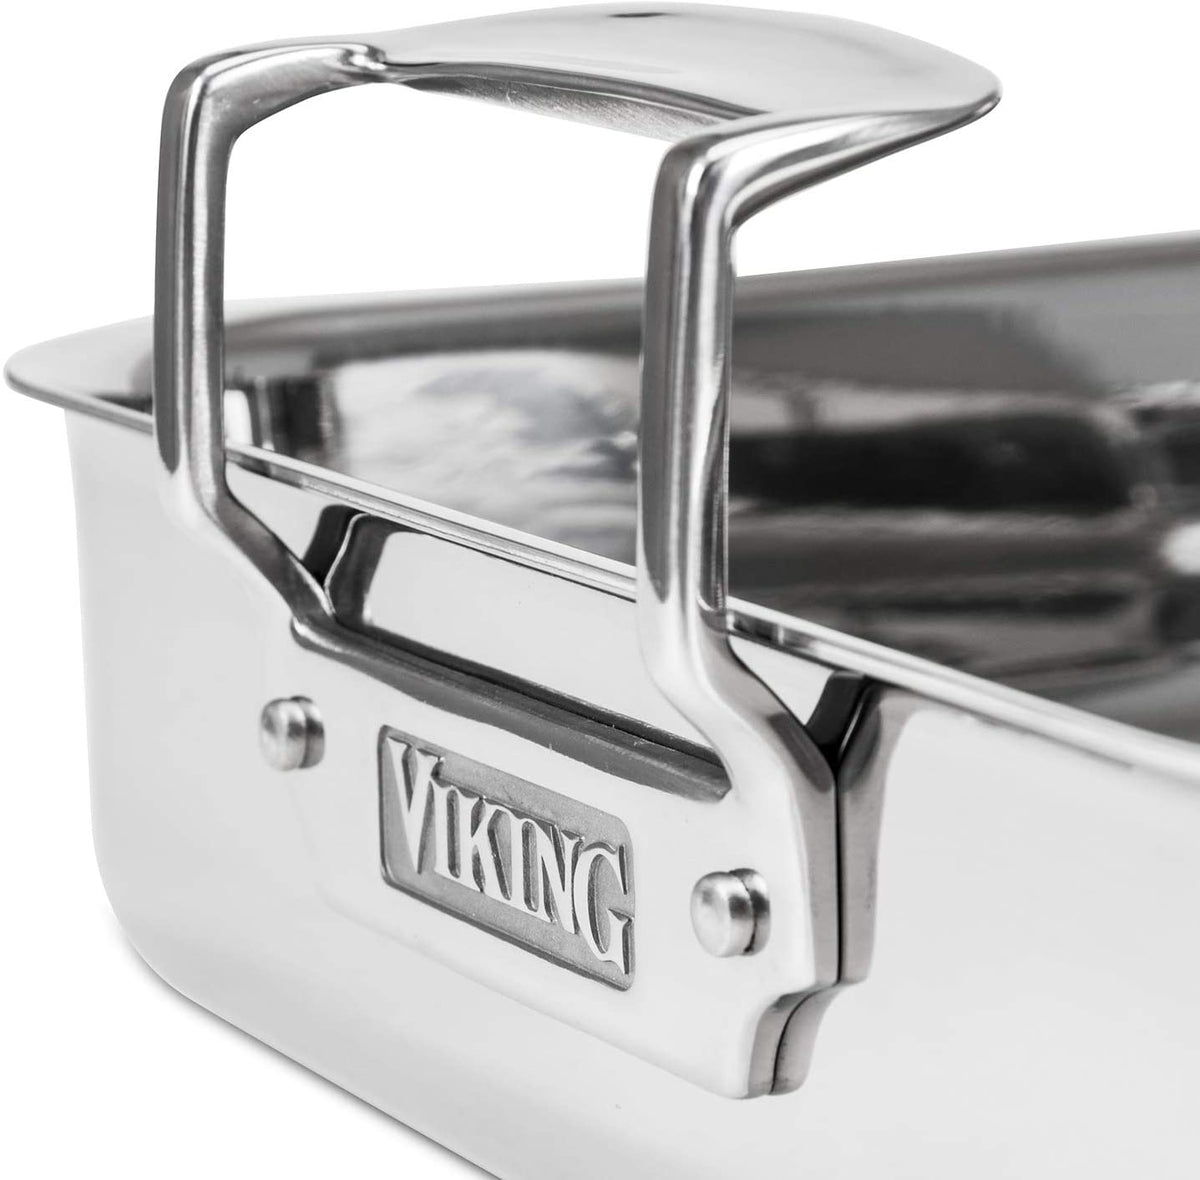 Viking Culinary 4013-5016 3-Ply Stainless Steel Roasting Pan with Nonstick Rack, 16 Inch x 13 Inch - The Finished Room